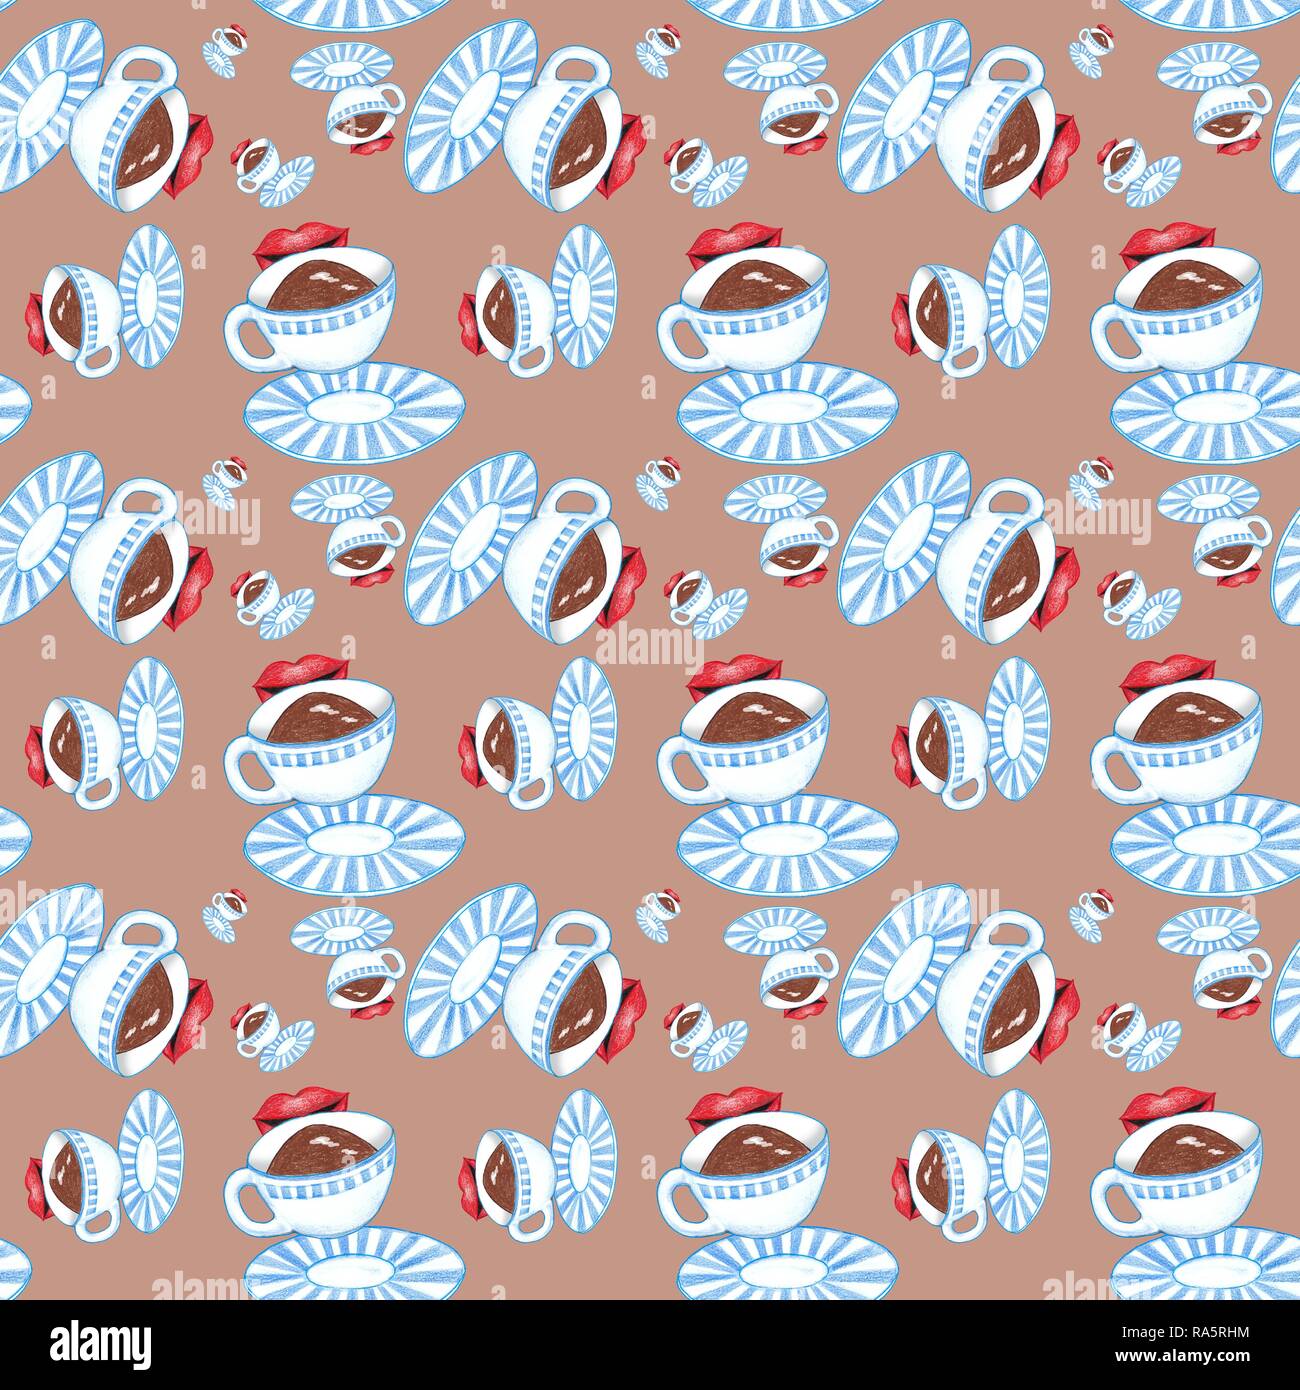 Wrapping paper, wallpaper, seamless pattern, cup with coffee or cocoa, red lips, mouth of a woman, pleasure, background brown Stock Photo